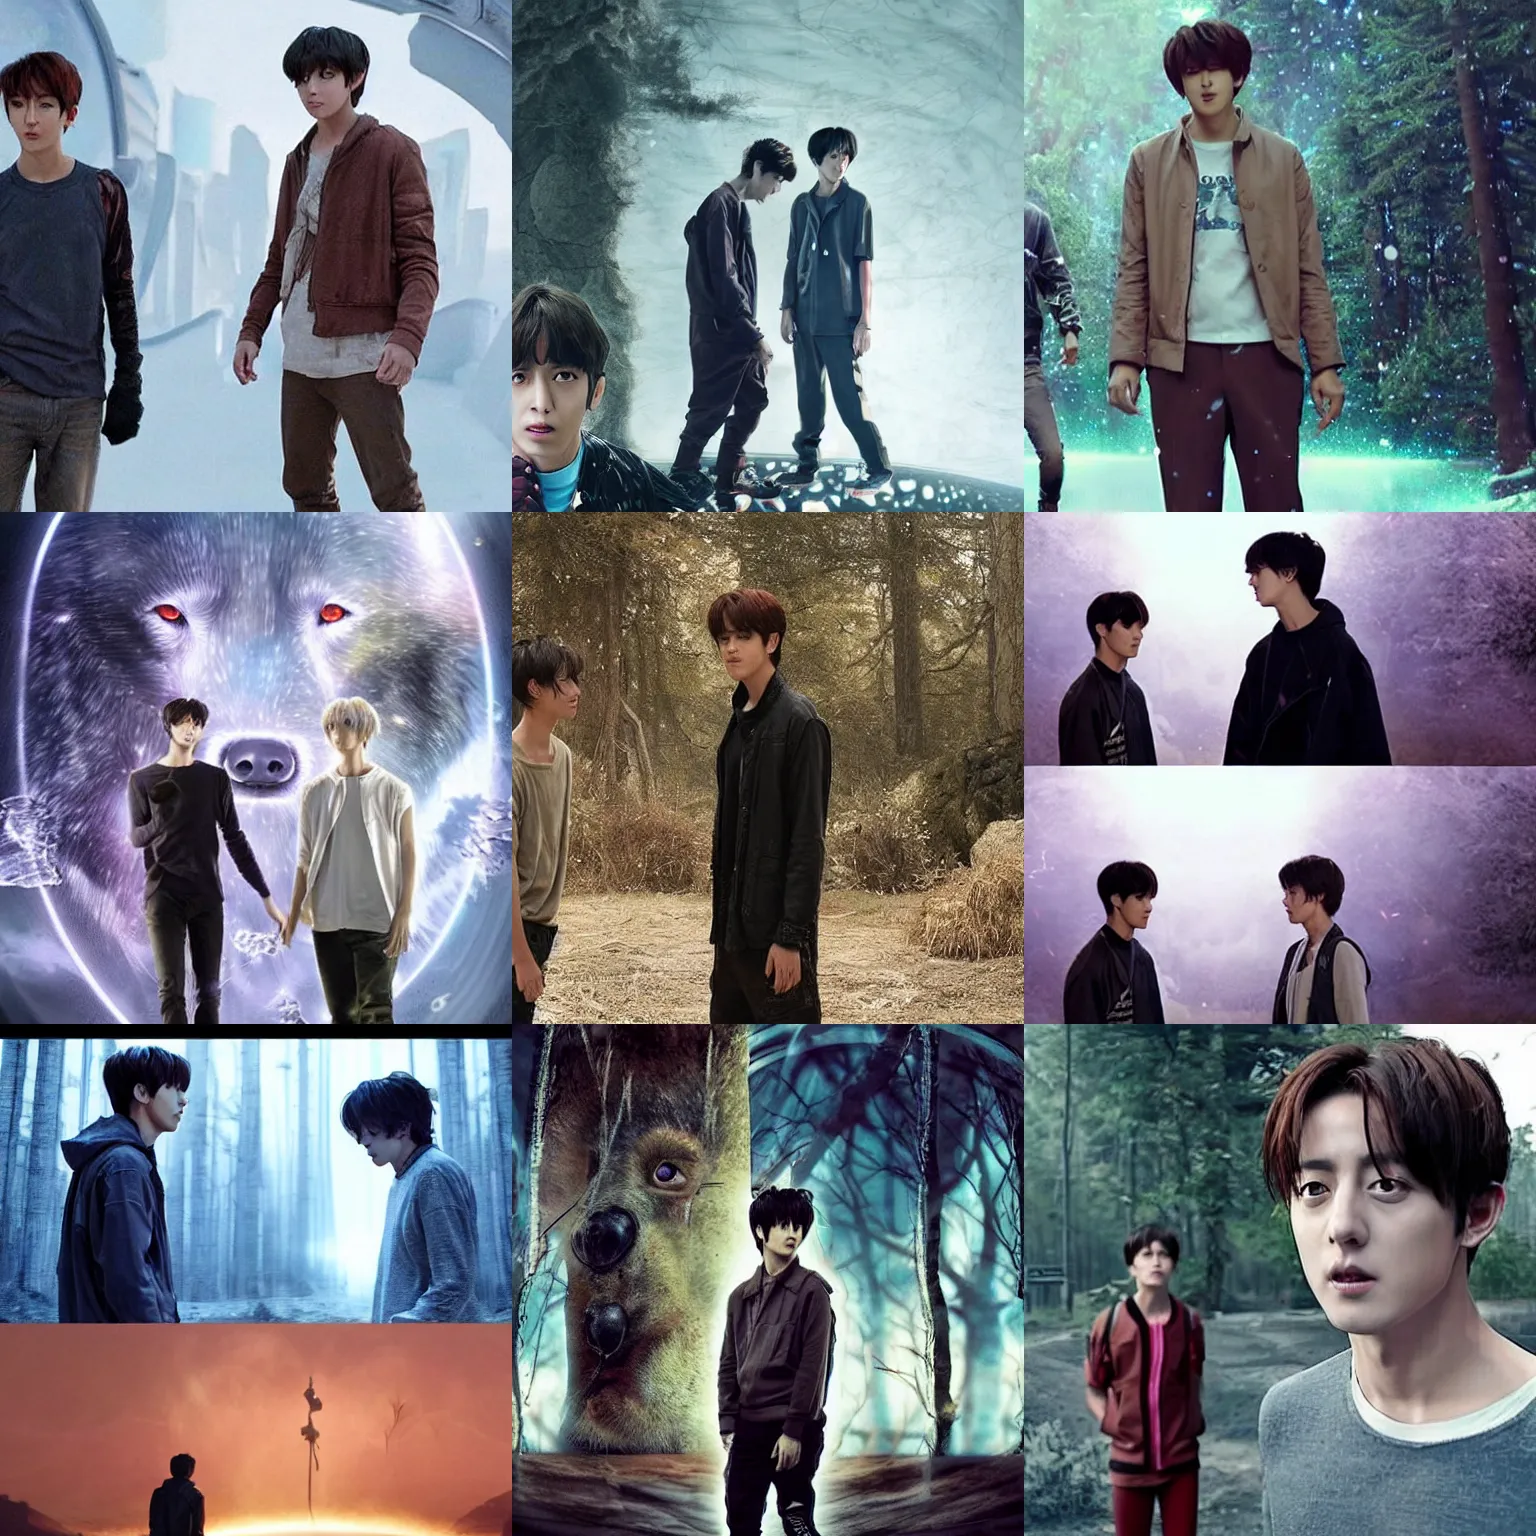 Prompt: scene from a 2010s science fiction film about a man named Seokjin entering a portal to another world+ that is inhabited by human animal hybrids+ he first meets a cute boy named Jungkook who is half human & half wolf+ CGSOCIETY + directed by Luc Besson +